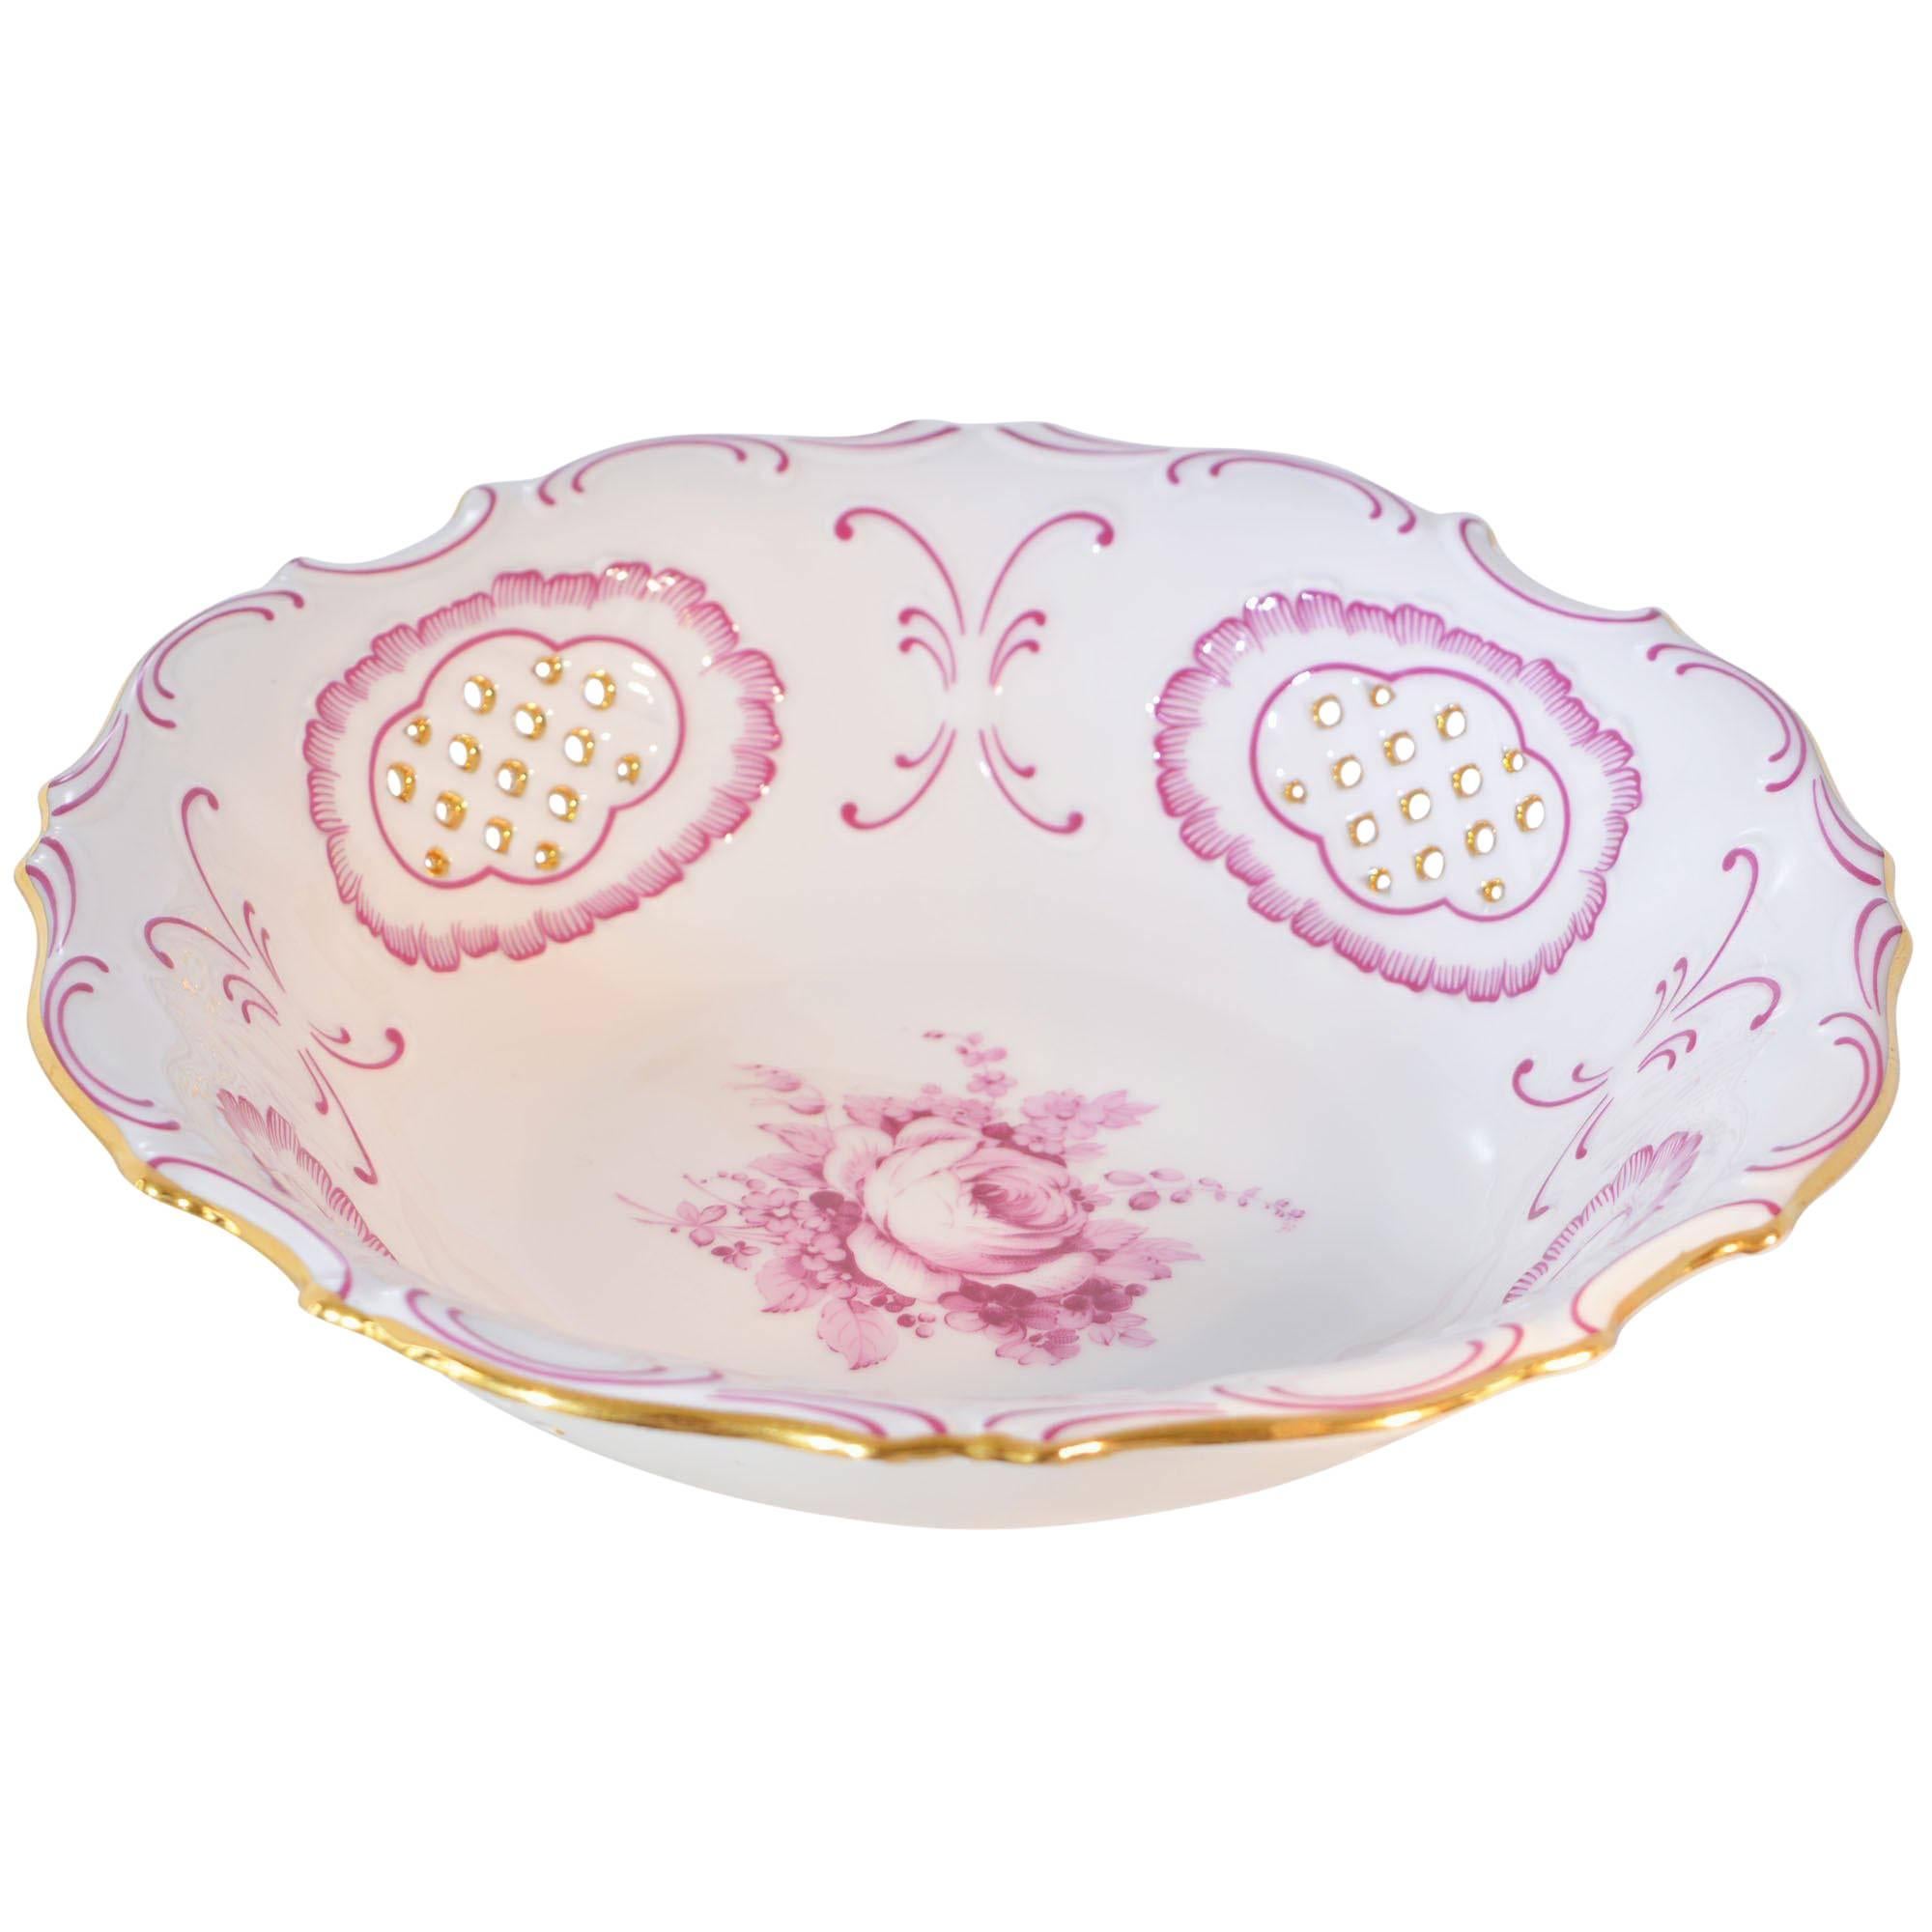 A vintage Pirken-Hammer porcelain bowl. This piece is decorated with a central pink floral design with reticulated panels to border accented in gilt and pink scalloped frames. The rim is trimmed in pink scrollwork and finished in gold trim. It is